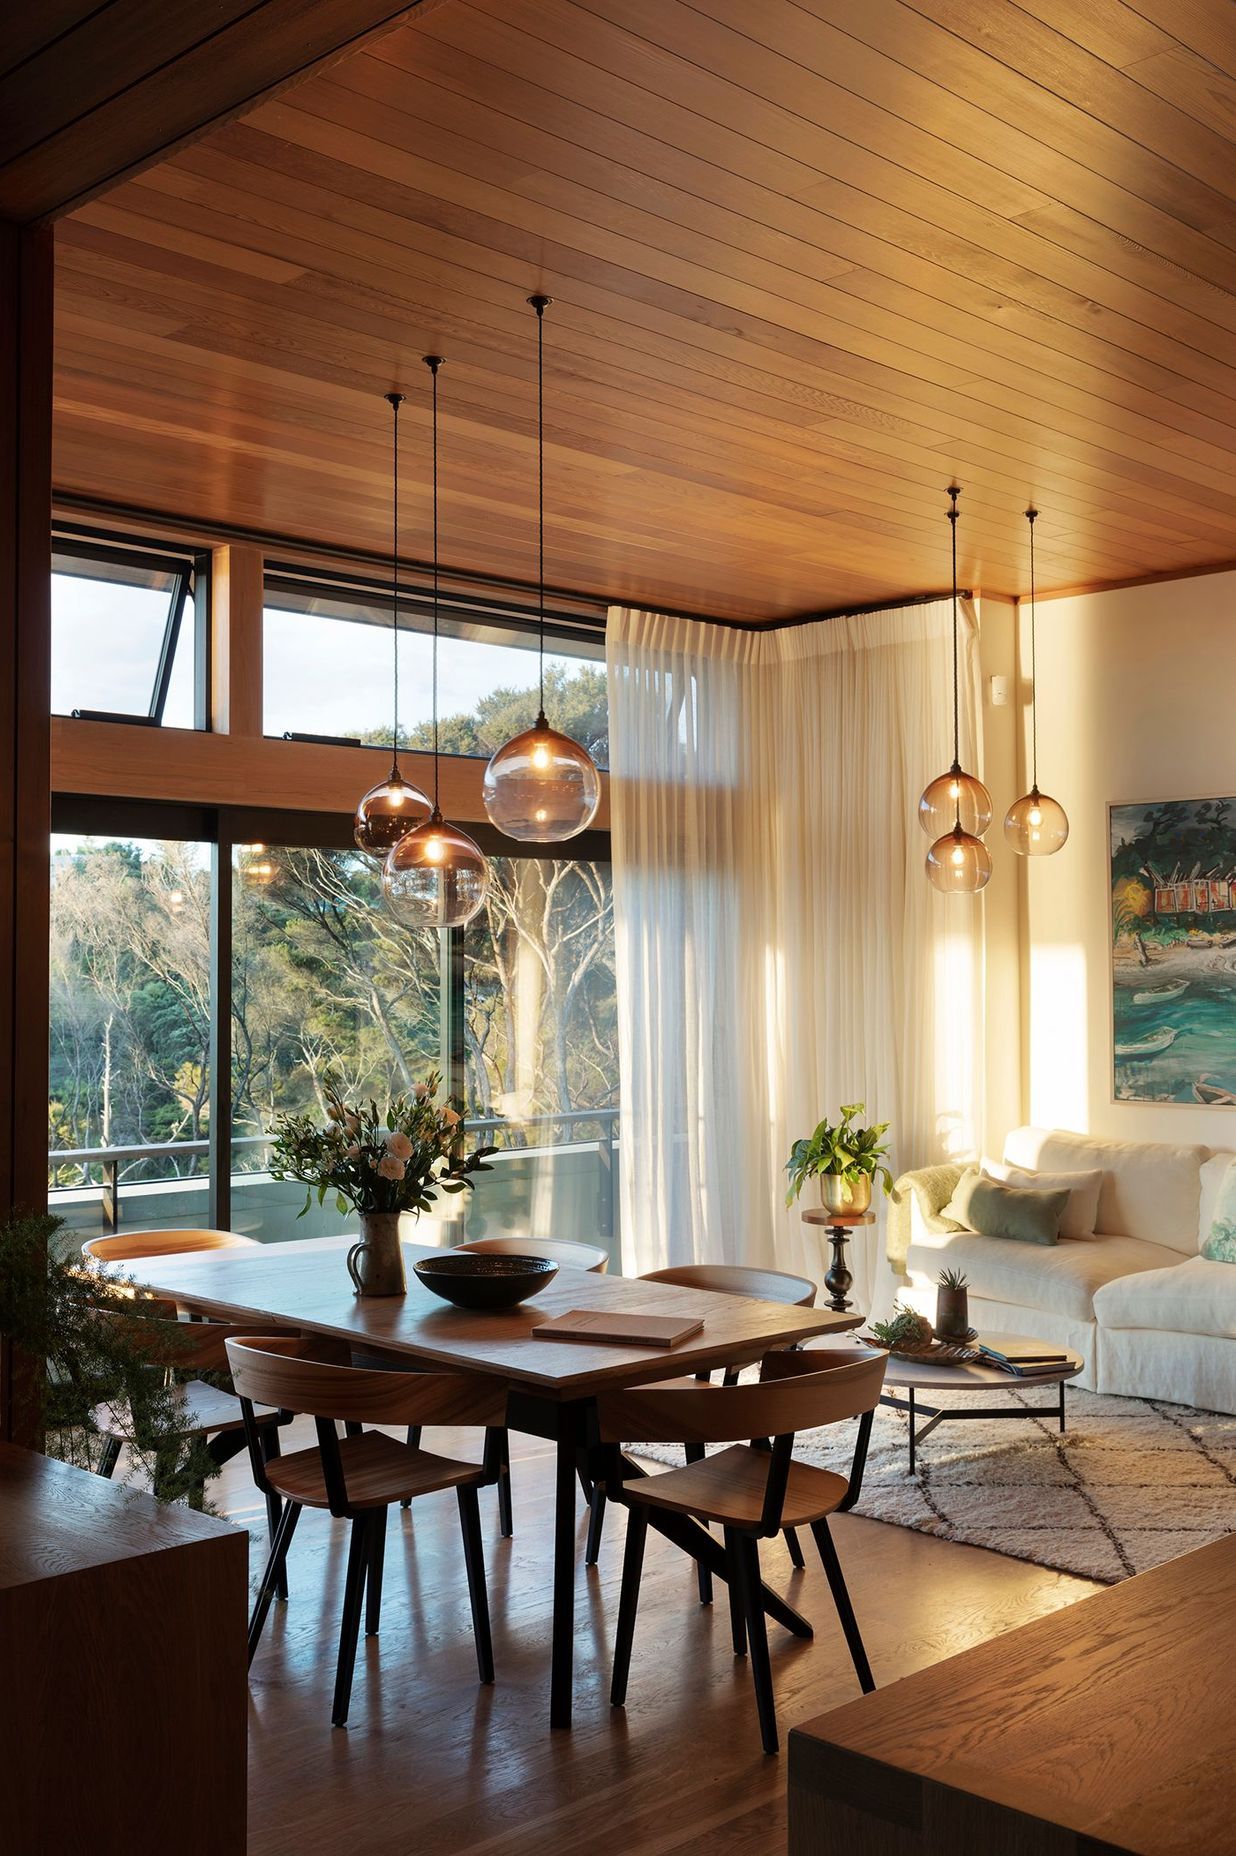 High-level windows draw light into the liviing/dining space during the winter months.